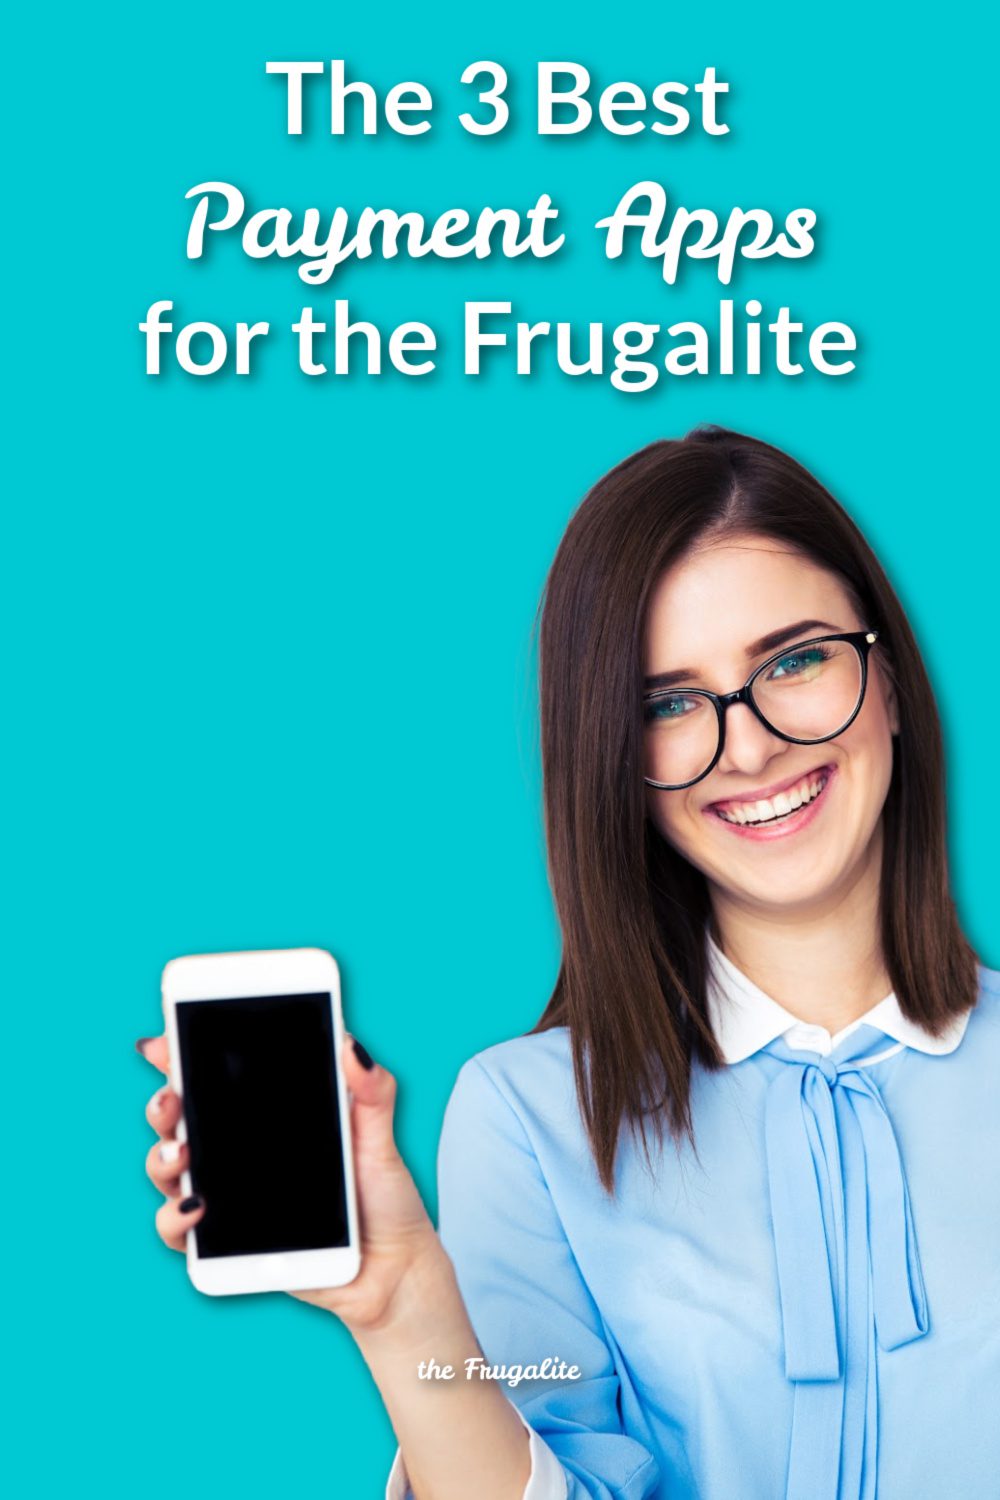 The 3 Best Payment Apps for the Frugalite